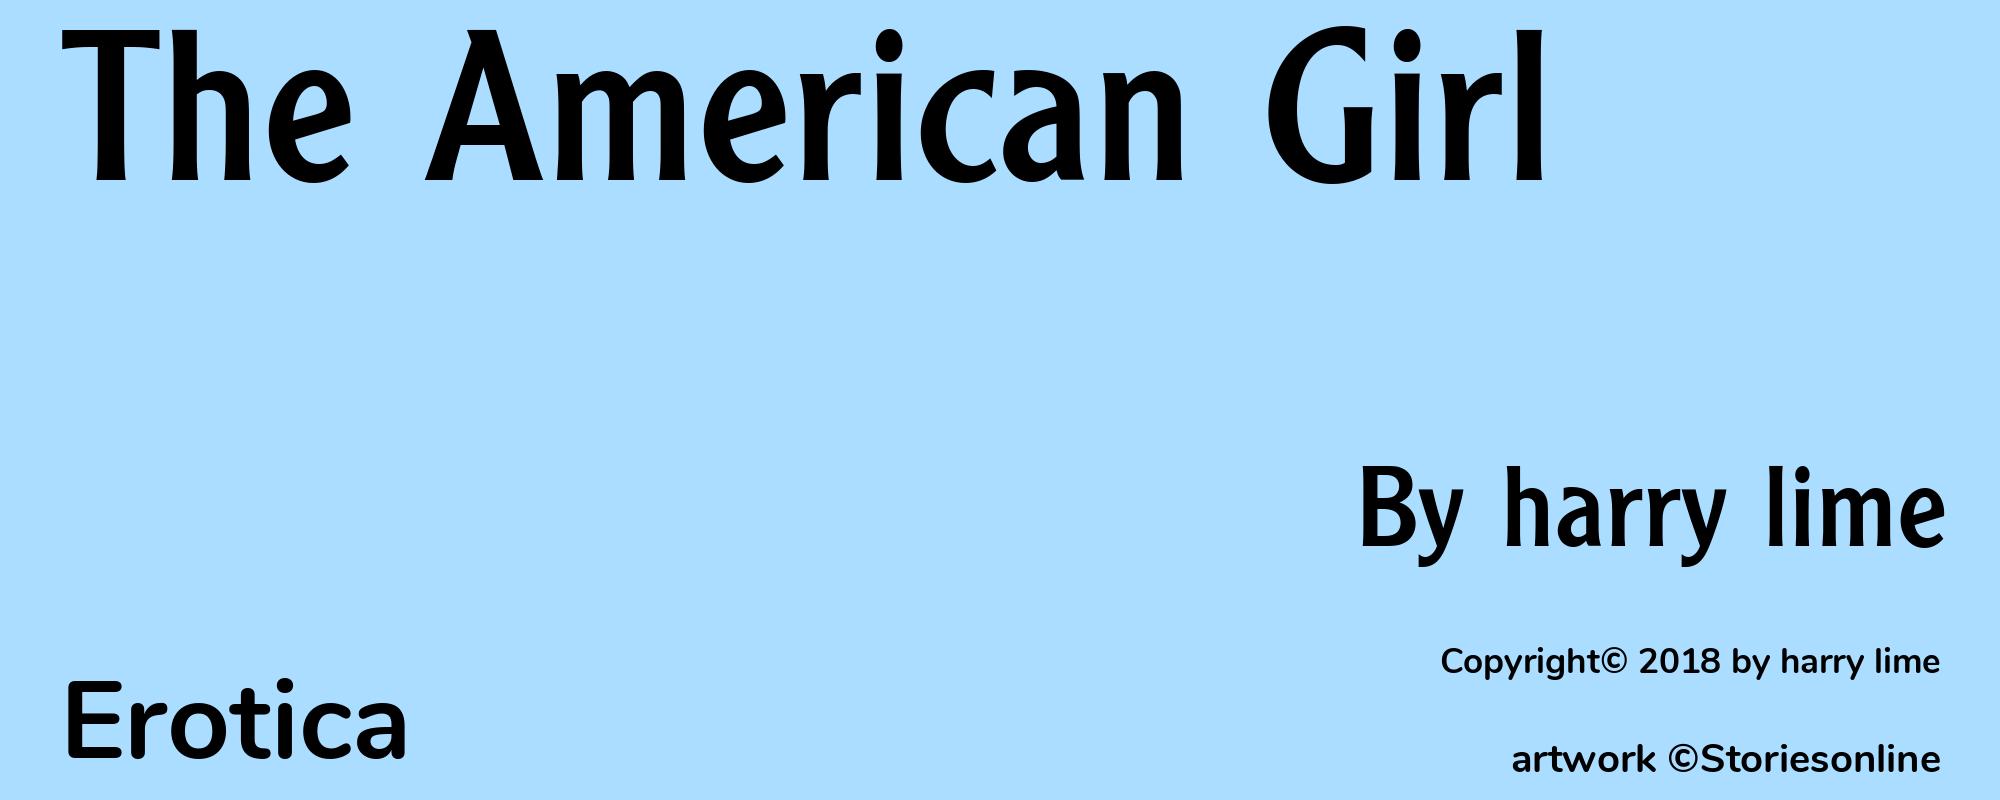 The American Girl - Cover